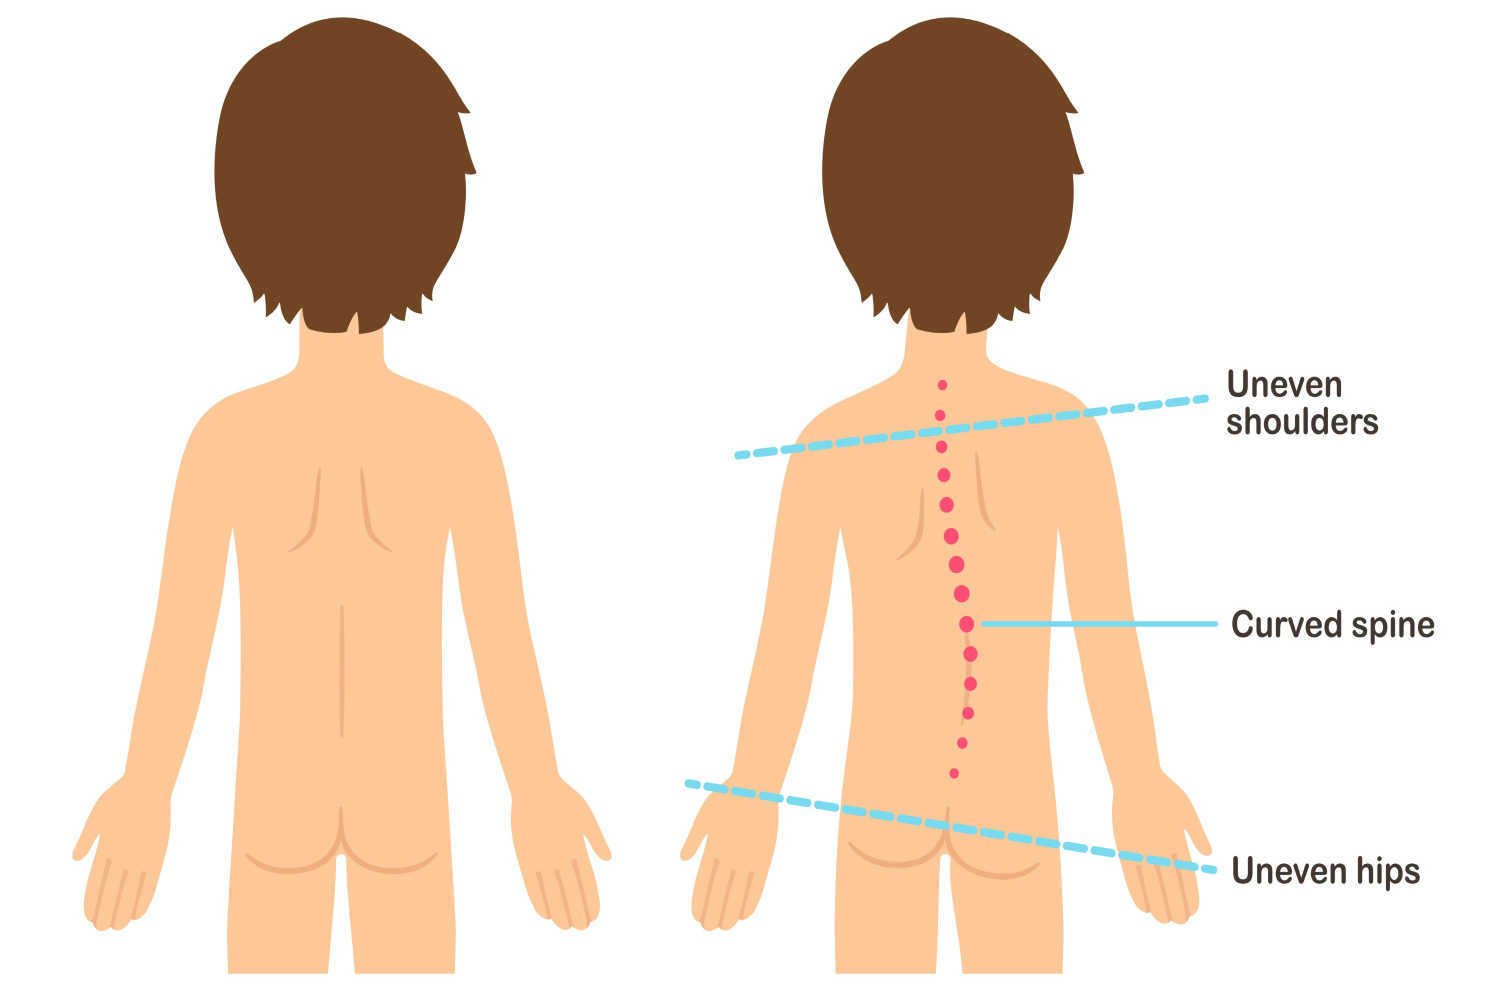 Signs of Infantile Scoliosis